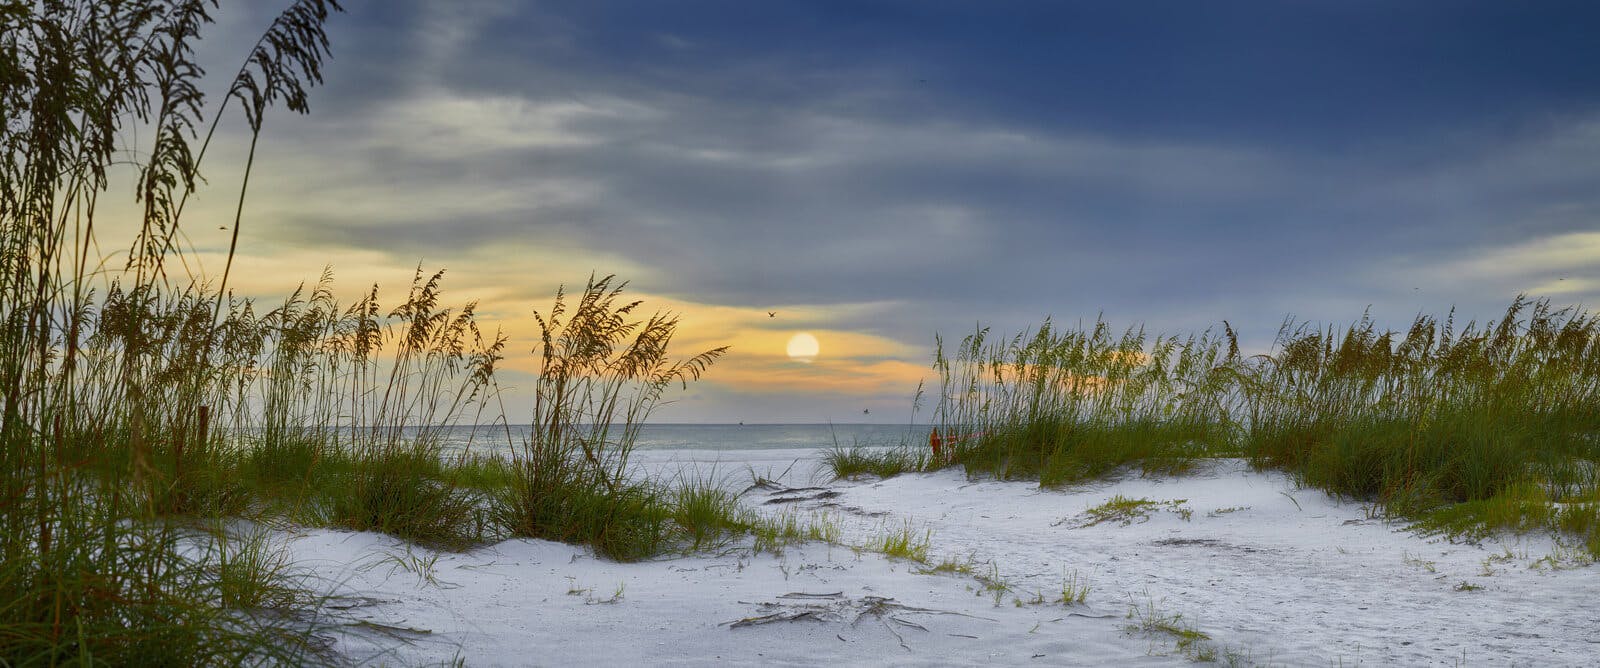 Holmes Beach in Anna Maria Island - panoramic image of white sand with beach grass and sunset sky